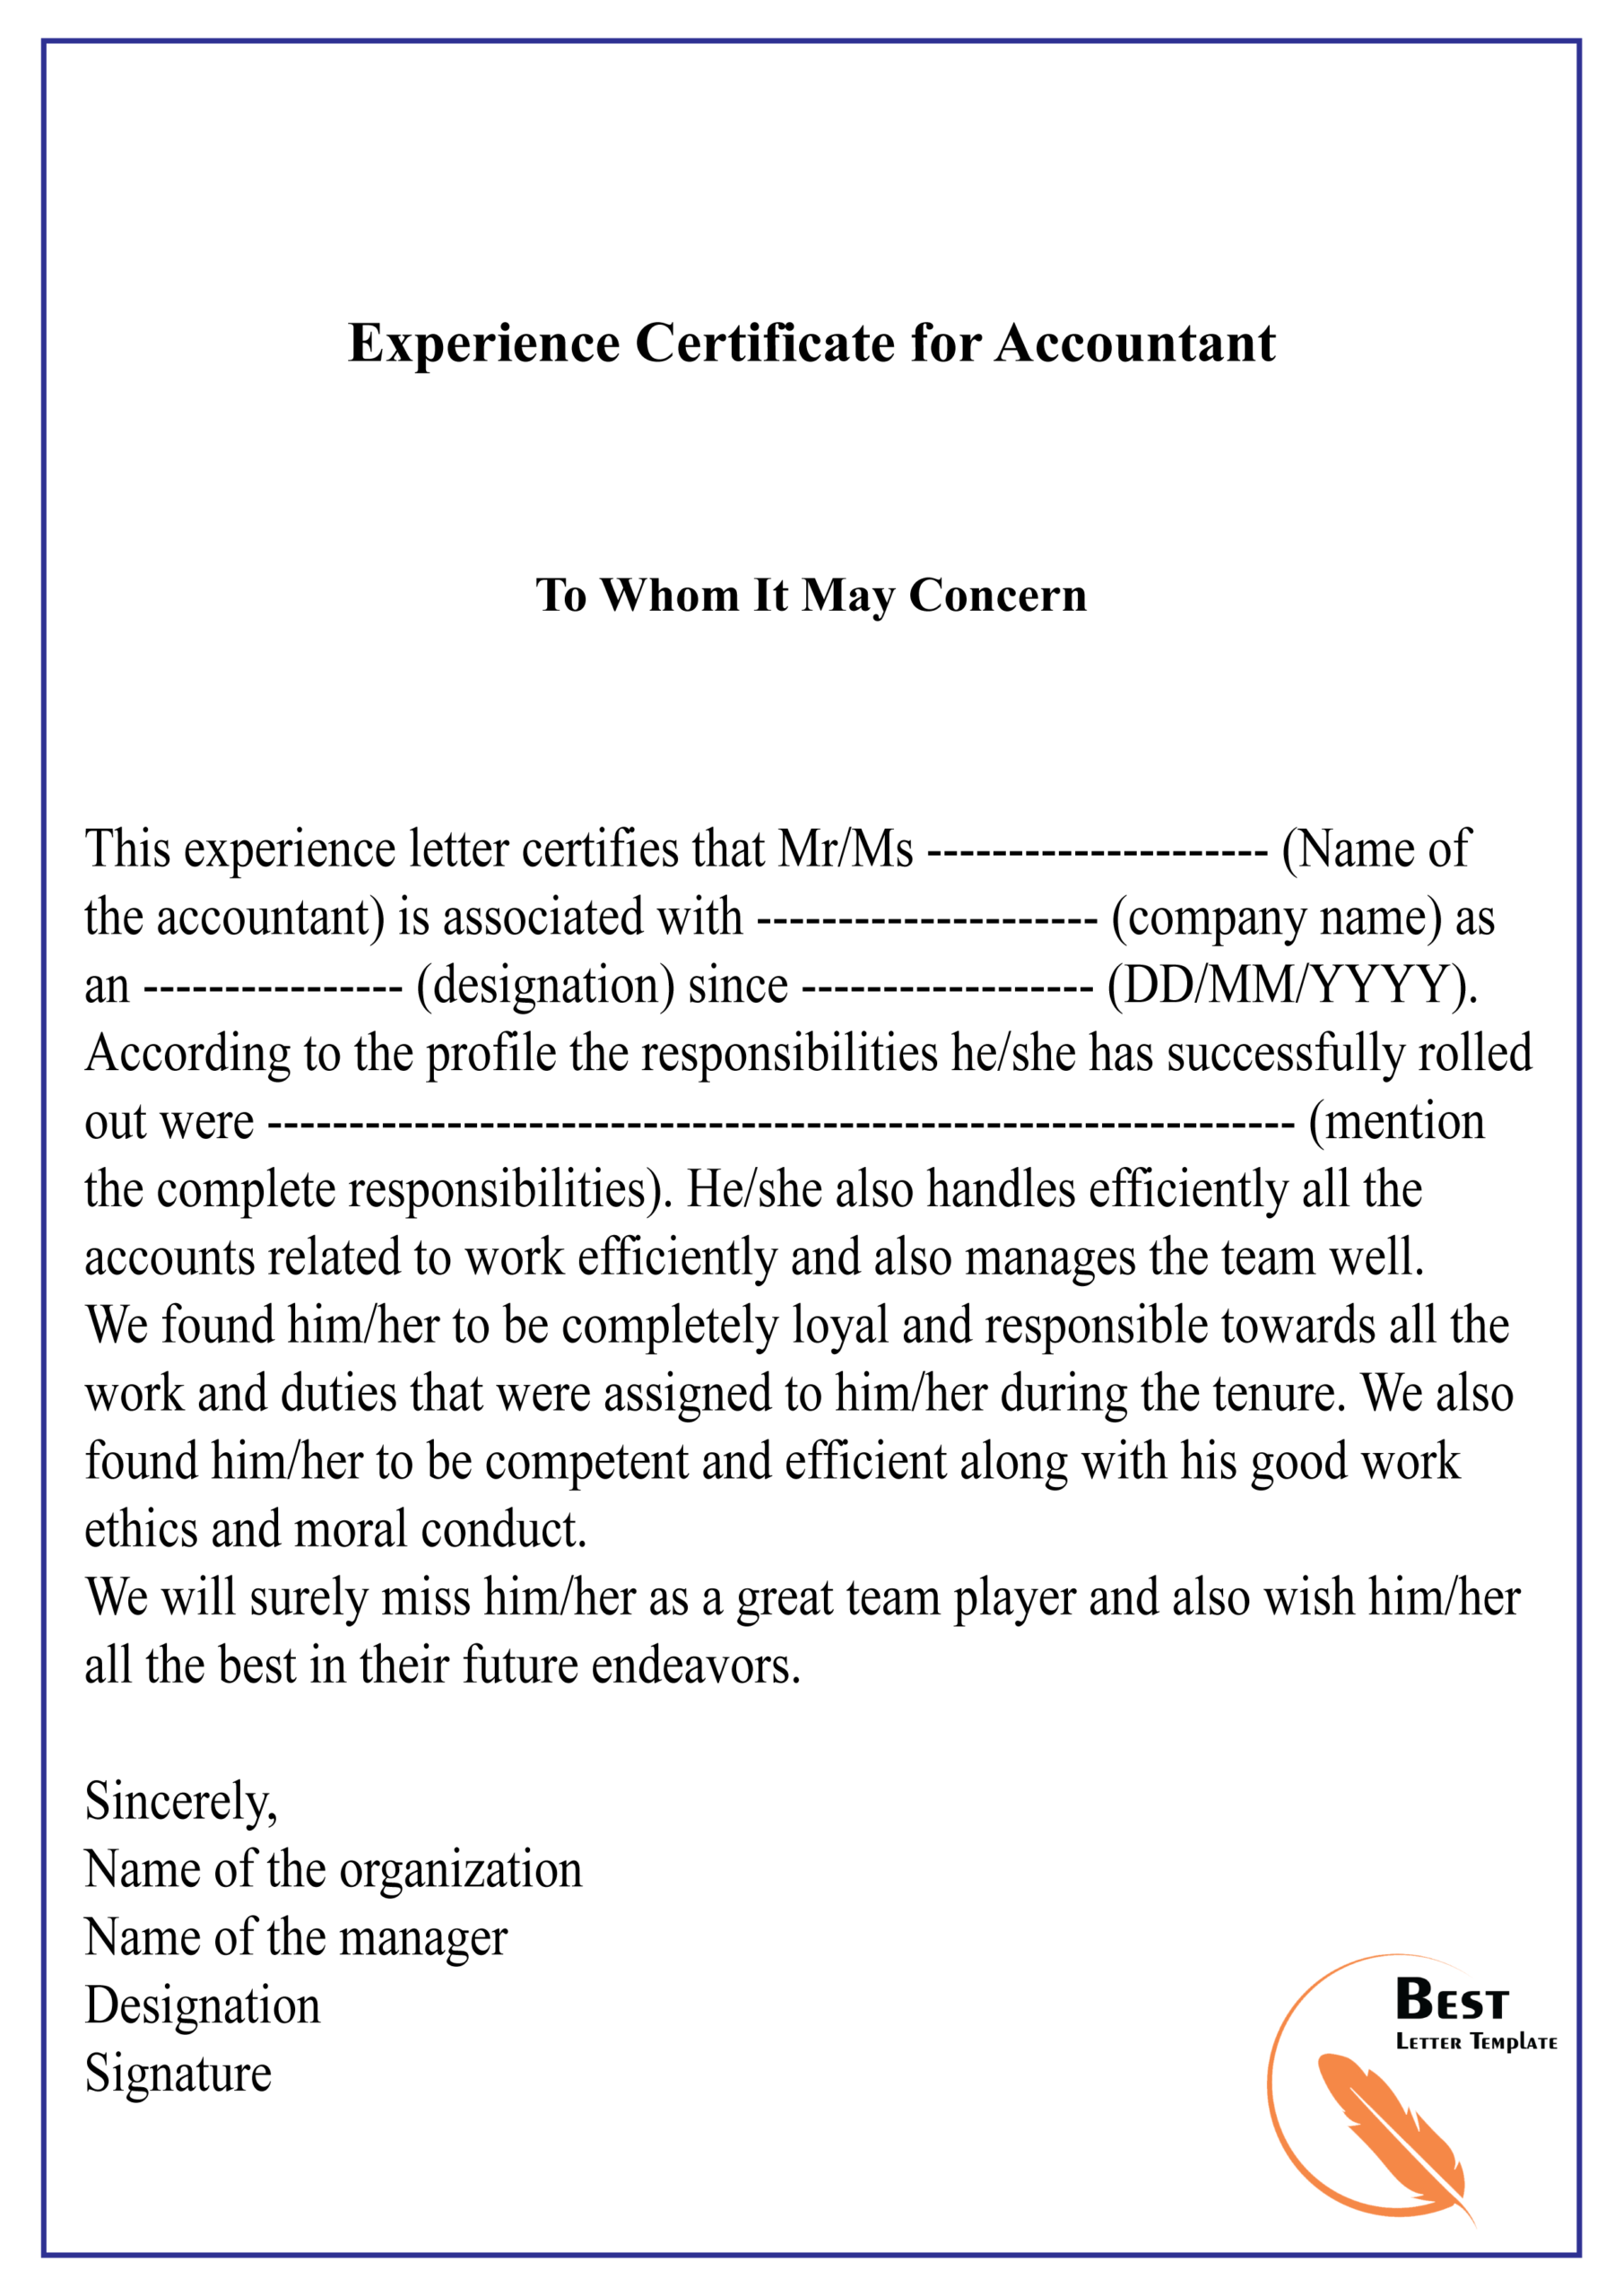 Experience Certificate For Accountant 01 | Best Letter Template Pertaining To Template Of Experience Certificate